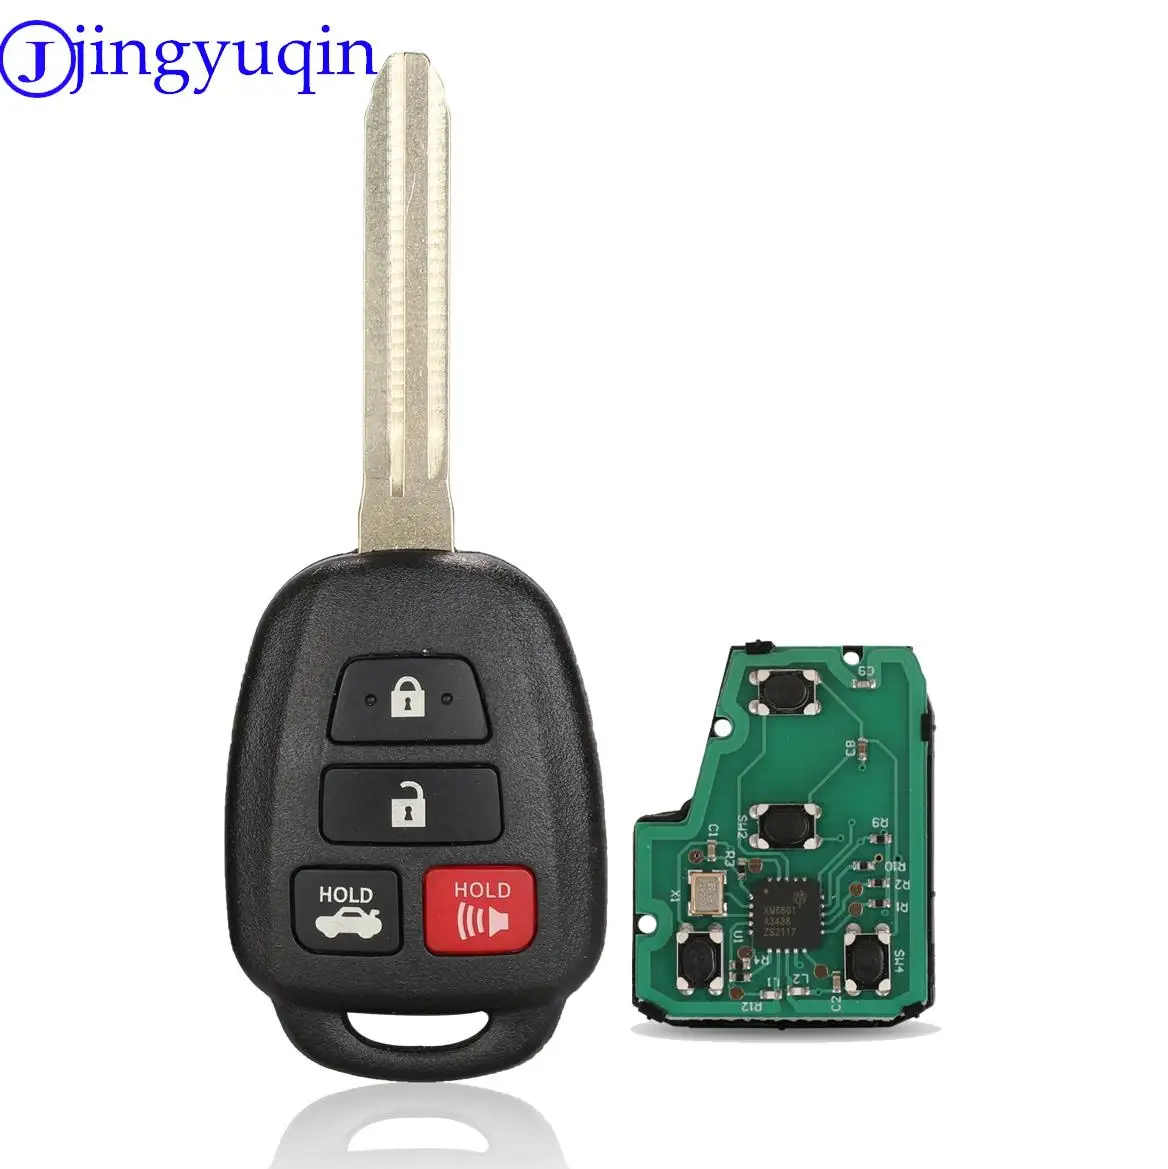 jingyuqin FCC: GQ4-52T KYDZ Replacement Keyless Entry Remote Car Key Fob for Toyota Rav4 2013-2018 With H Chip Or G Chip 433mhz